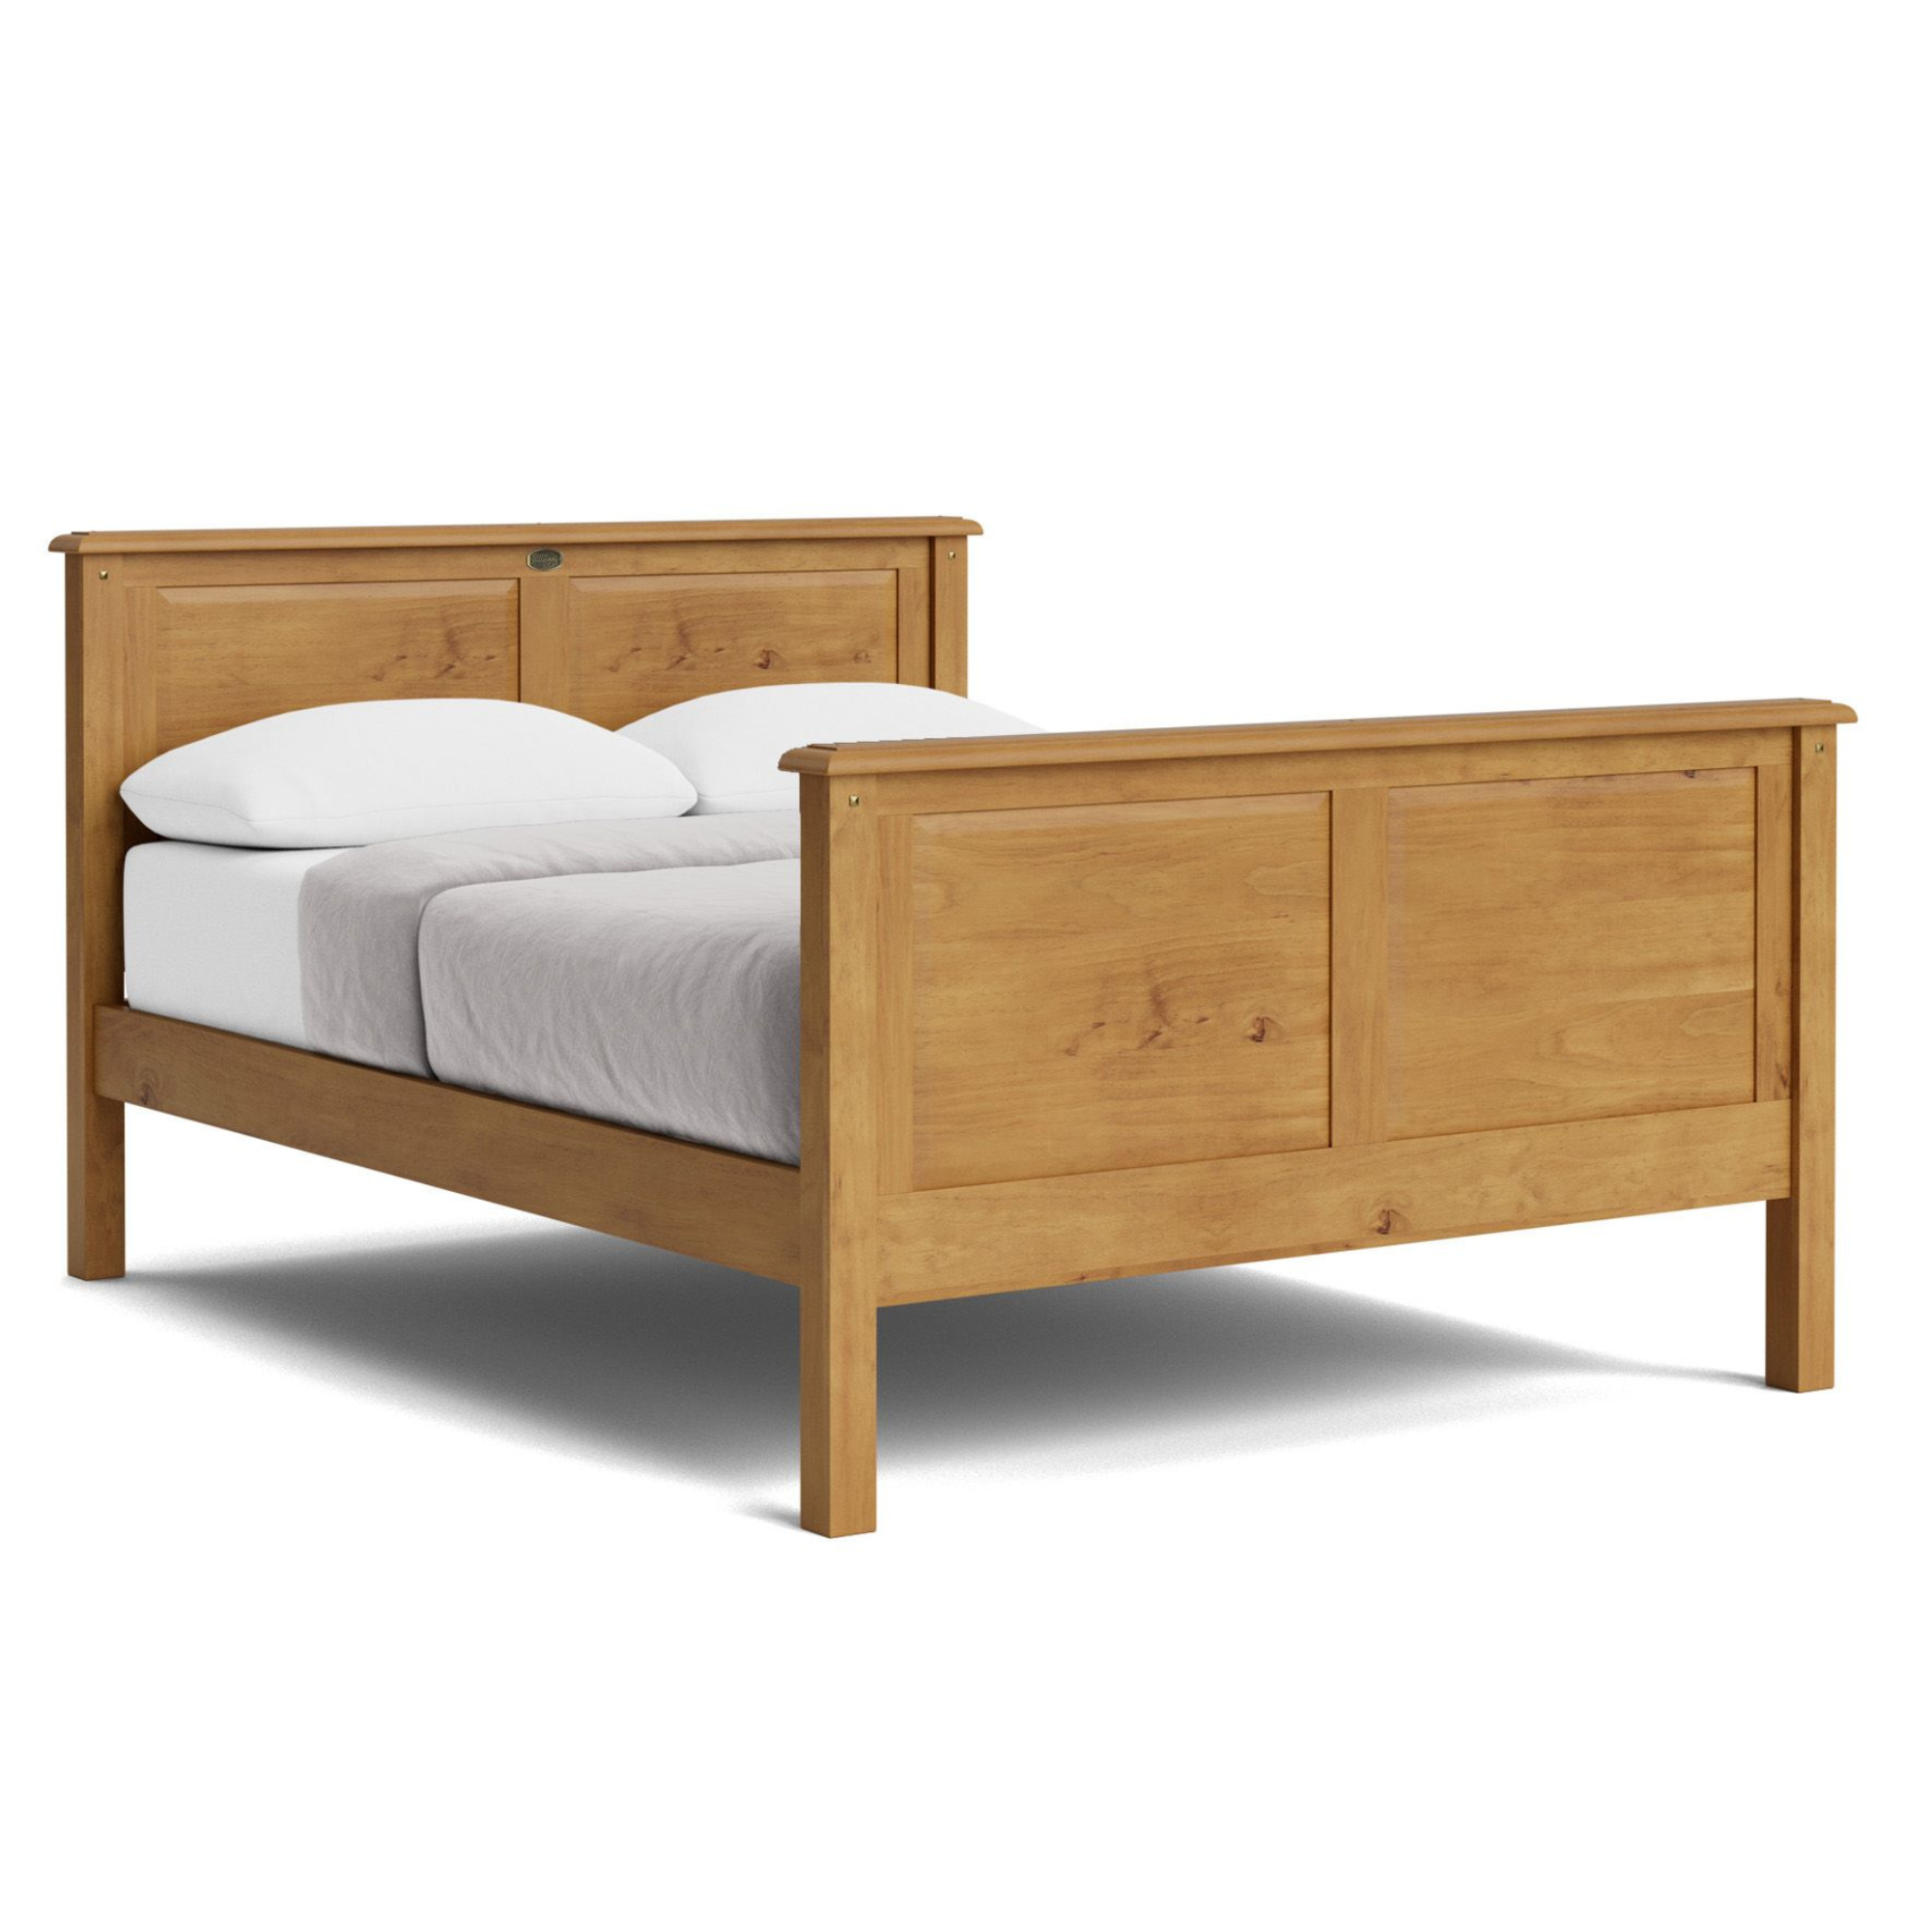 VILLAGER SLAT BED WITH HIGH FOOT | ALL SIZES | NZ MADE